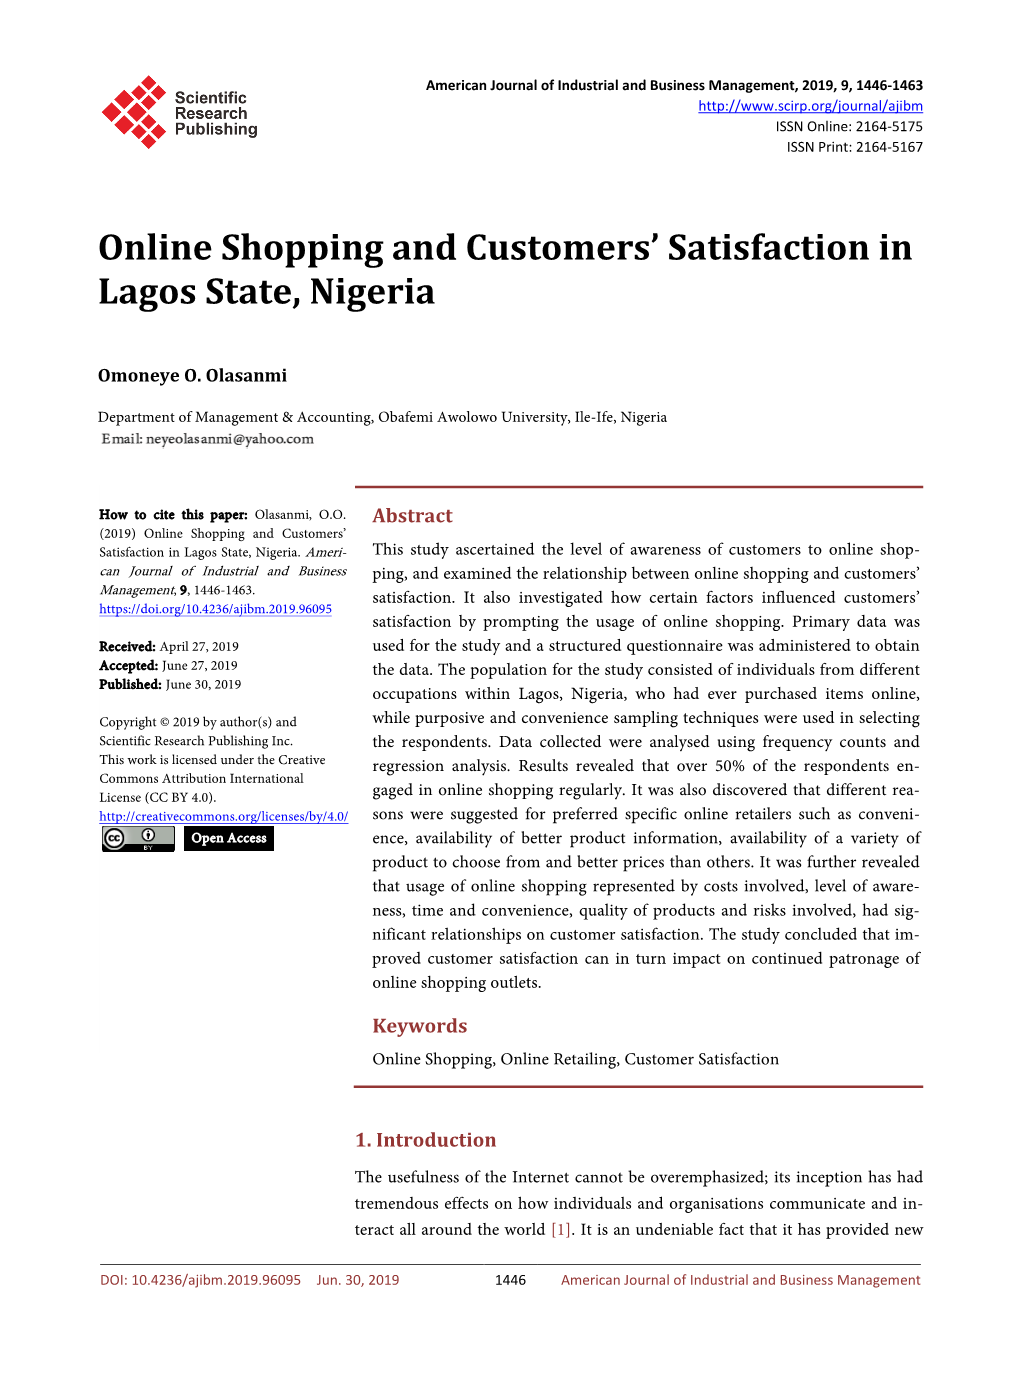 Online Shopping and Customers' Satisfaction in Lagos State, Nigeria